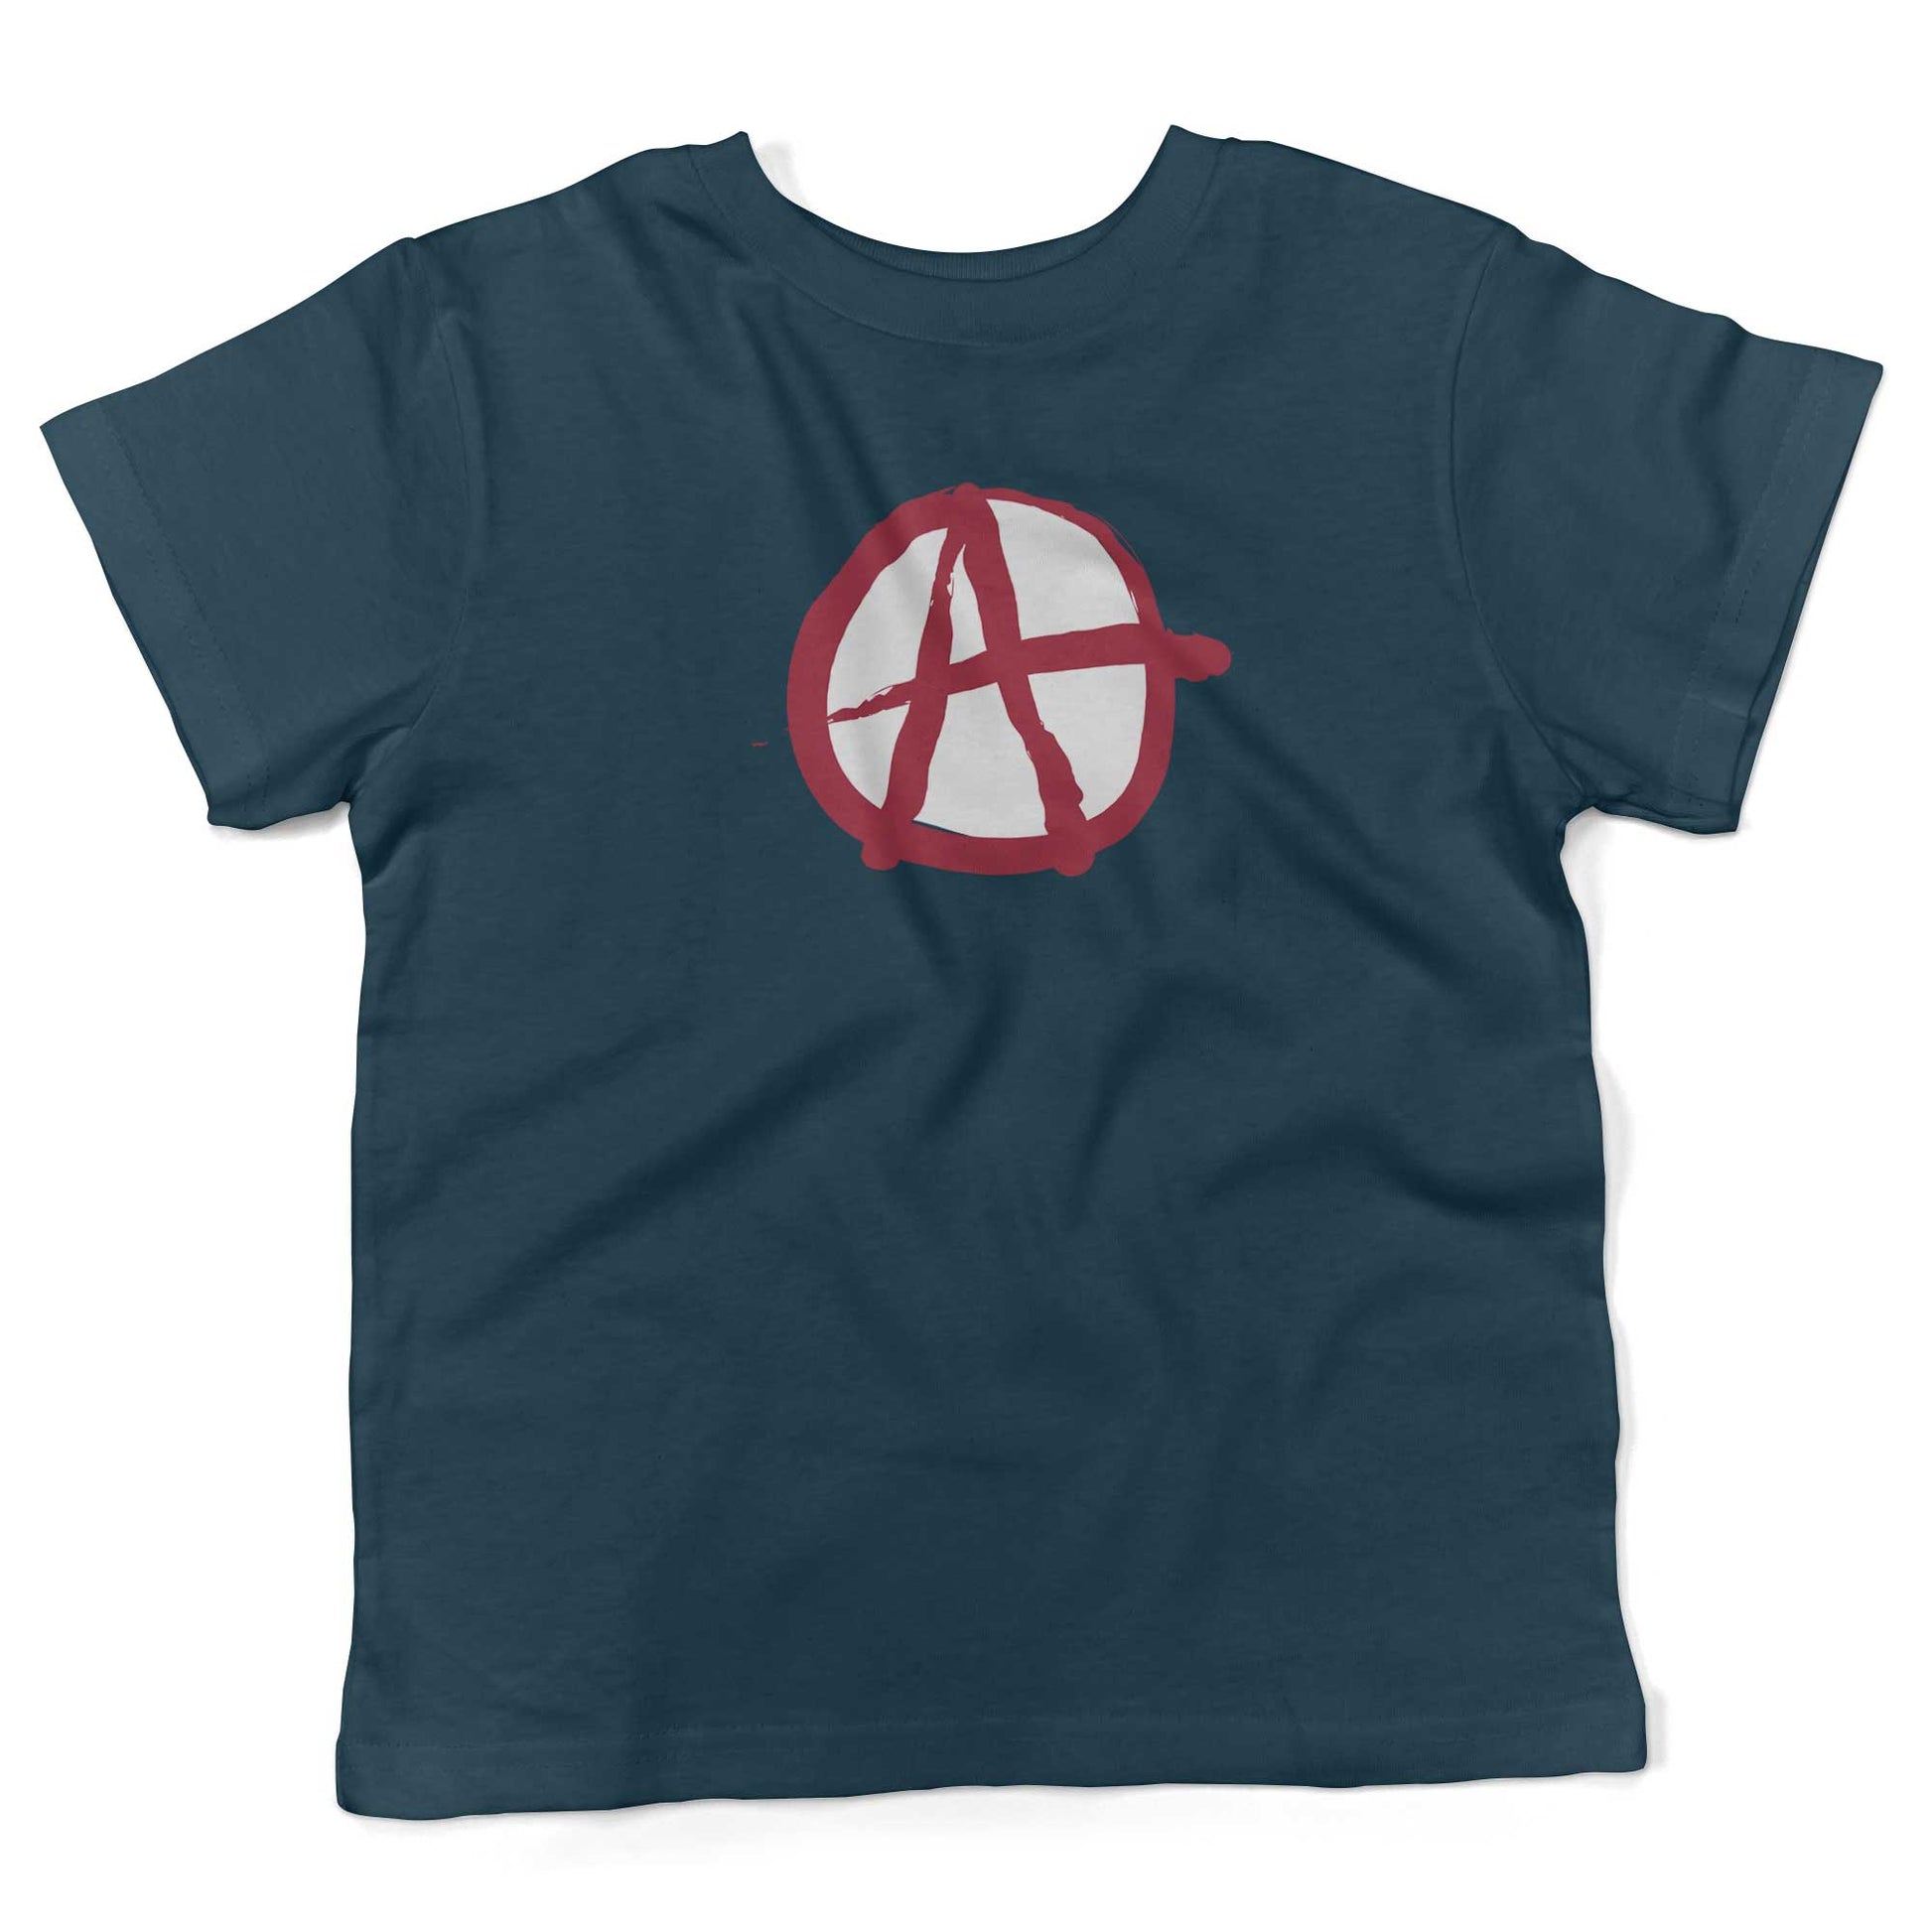 Anarchy Symbol Toddler Shirt-Organic Pacific Blue-2T